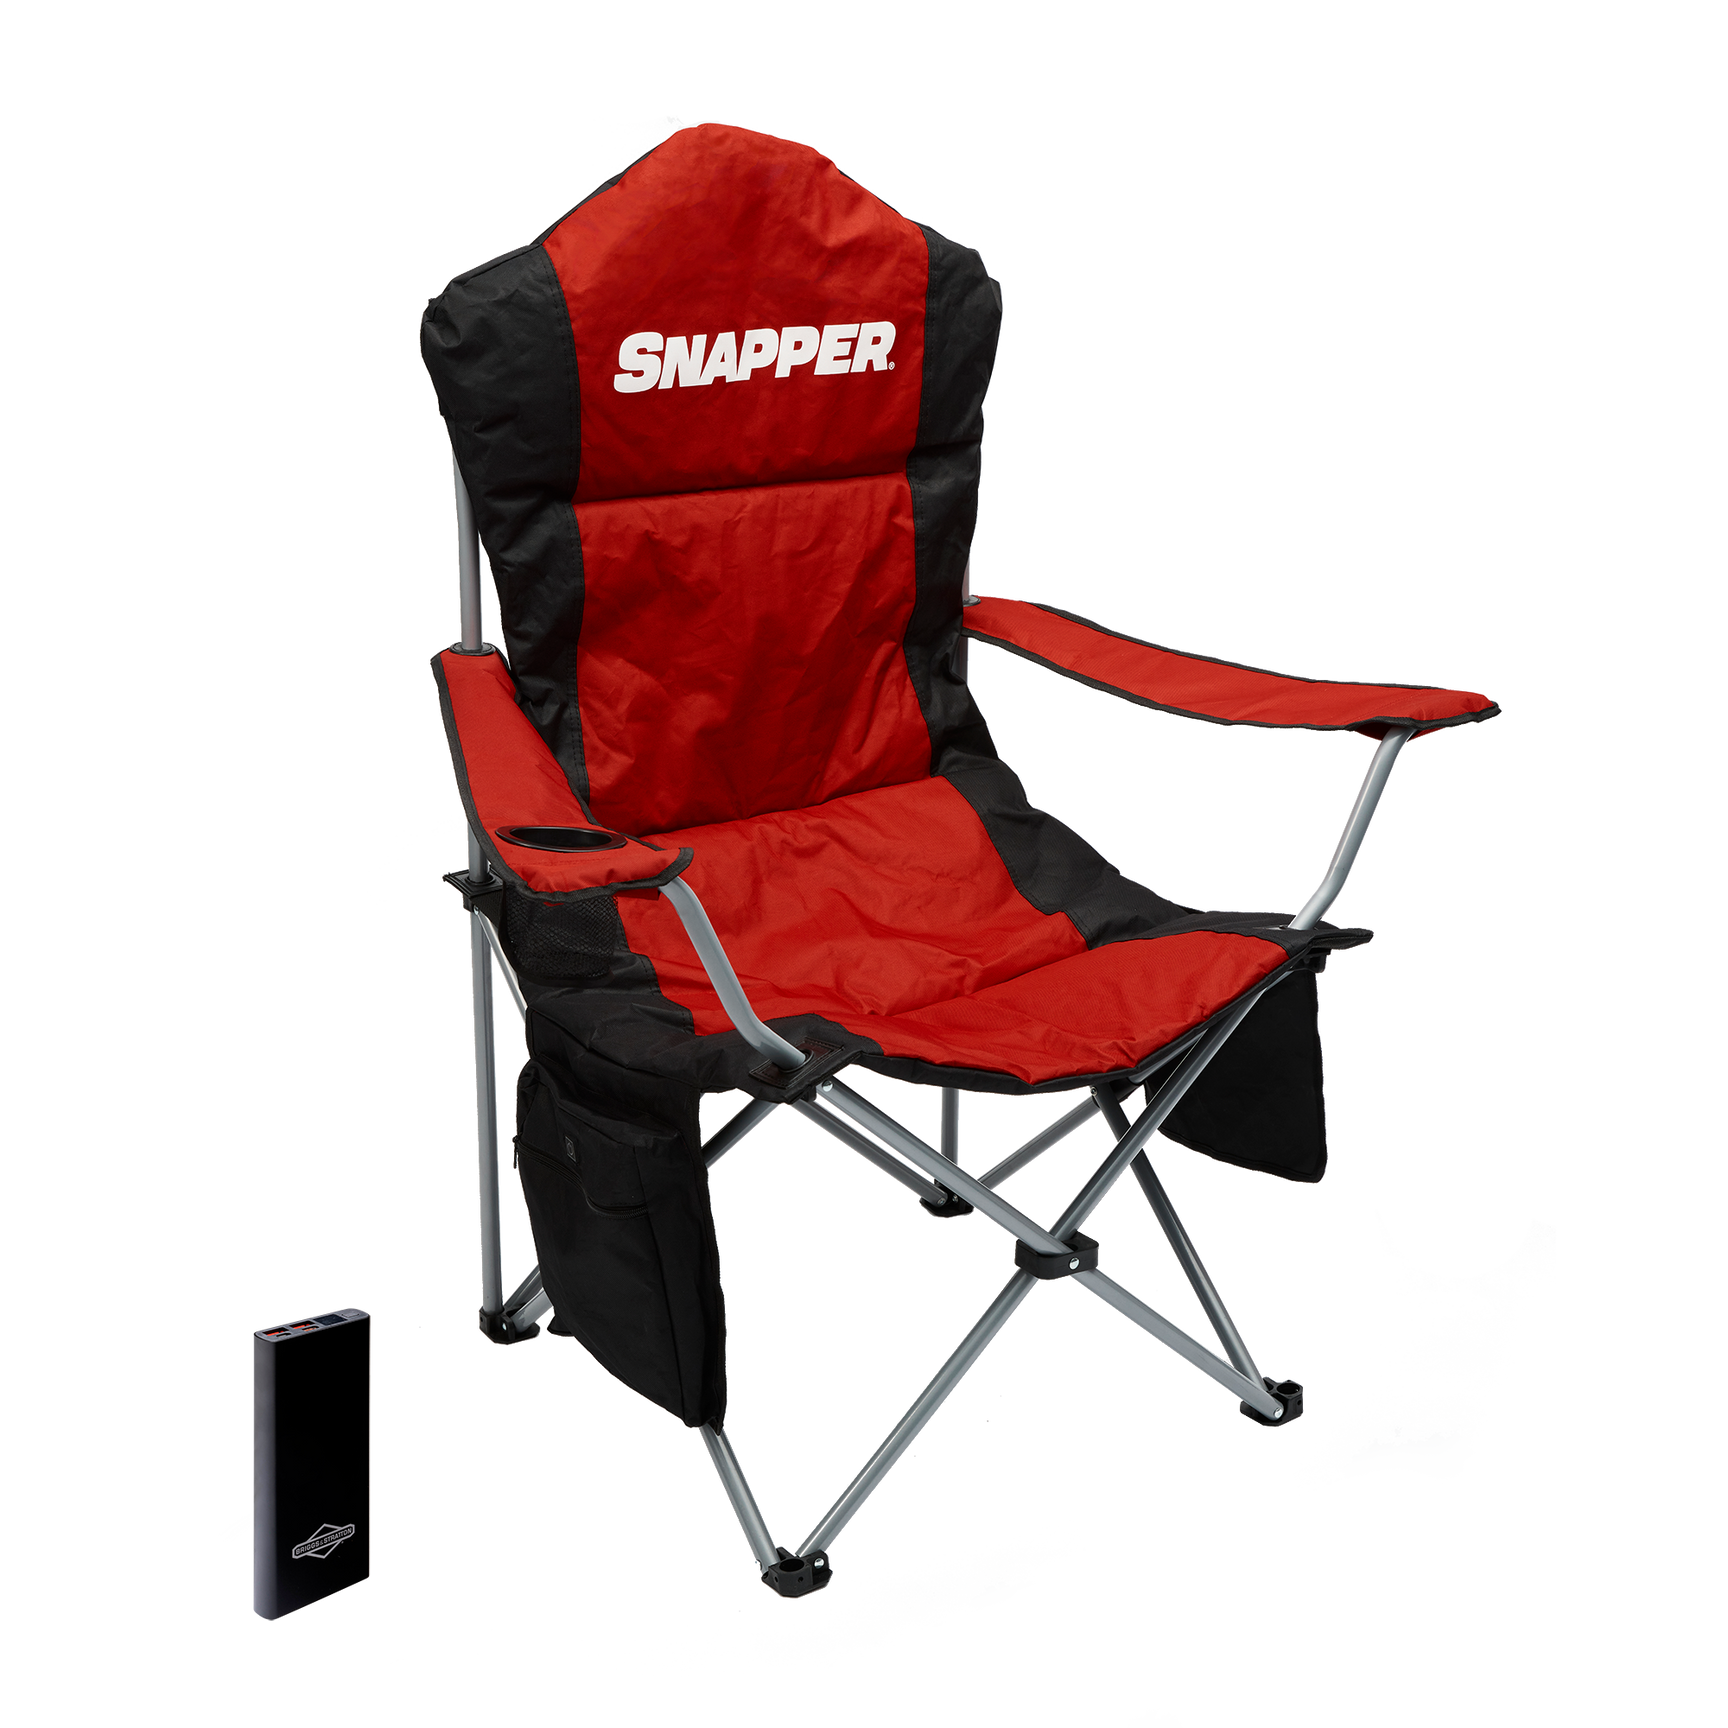 Heated Camp Chairs Snapper Australia